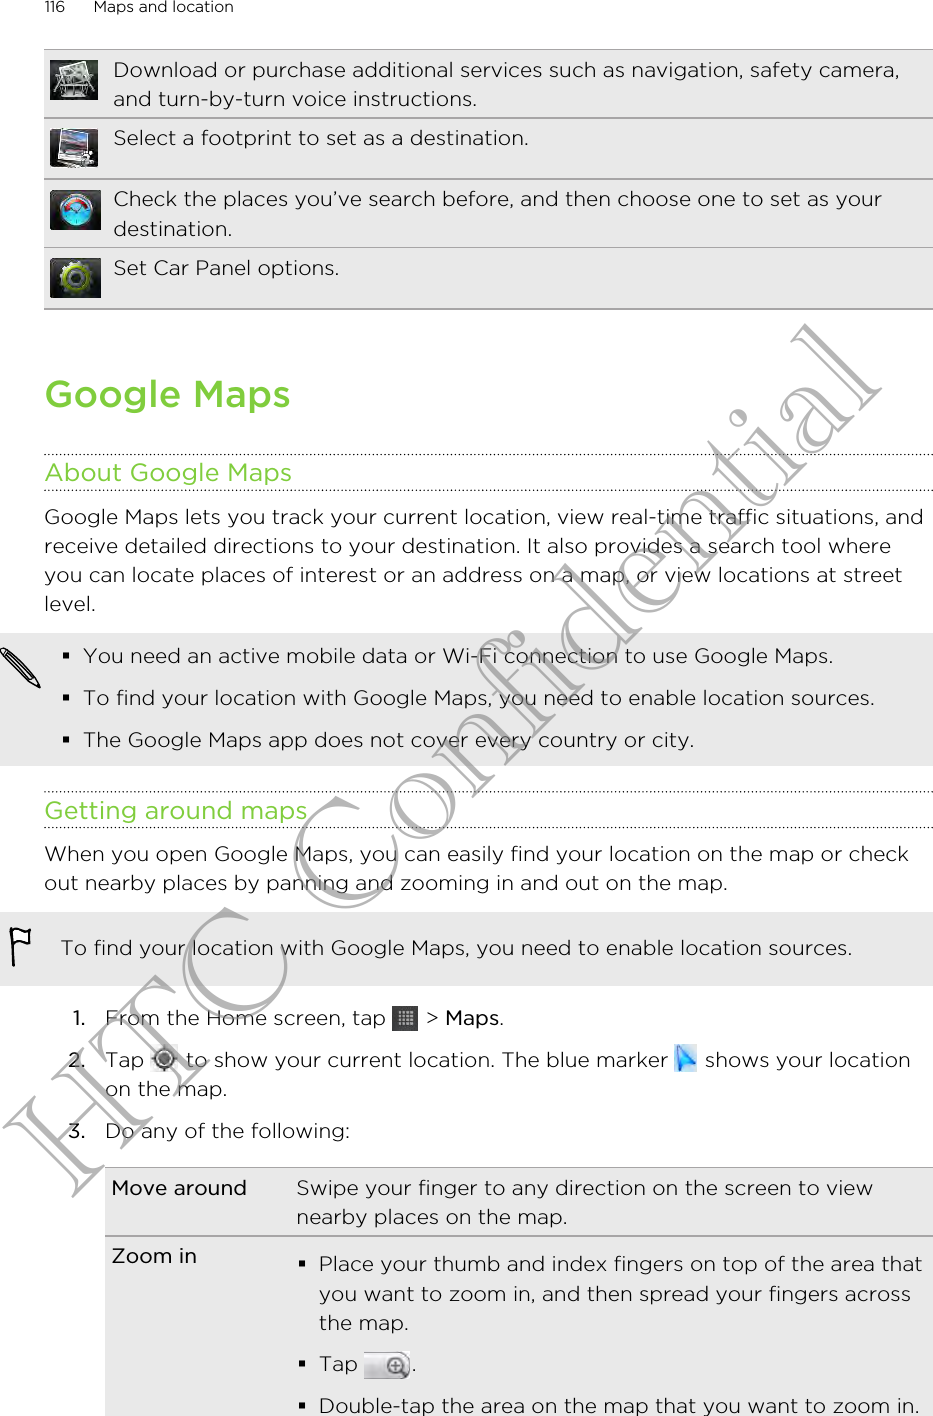 Download or purchase additional services such as navigation, safety camera,and turn-by-turn voice instructions.Select a footprint to set as a destination.Check the places you’ve search before, and then choose one to set as yourdestination.Set Car Panel options.Google MapsAbout Google MapsGoogle Maps lets you track your current location, view real-time traffic situations, andreceive detailed directions to your destination. It also provides a search tool whereyou can locate places of interest or an address on a map, or view locations at streetlevel.§You need an active mobile data or Wi-Fi connection to use Google Maps.§To find your location with Google Maps, you need to enable location sources.§The Google Maps app does not cover every country or city.Getting around mapsWhen you open Google Maps, you can easily find your location on the map or checkout nearby places by panning and zooming in and out on the map.To find your location with Google Maps, you need to enable location sources.1. From the Home screen, tap   &gt; Maps.2. Tap   to show your current location. The blue marker   shows your locationon the map.3. Do any of the following:Move around Swipe your finger to any direction on the screen to viewnearby places on the map.Zoom in §Place your thumb and index fingers on top of the area thatyou want to zoom in, and then spread your fingers acrossthe map.§Tap  .§Double-tap the area on the map that you want to zoom in.116 Maps and locationHTC Confidential